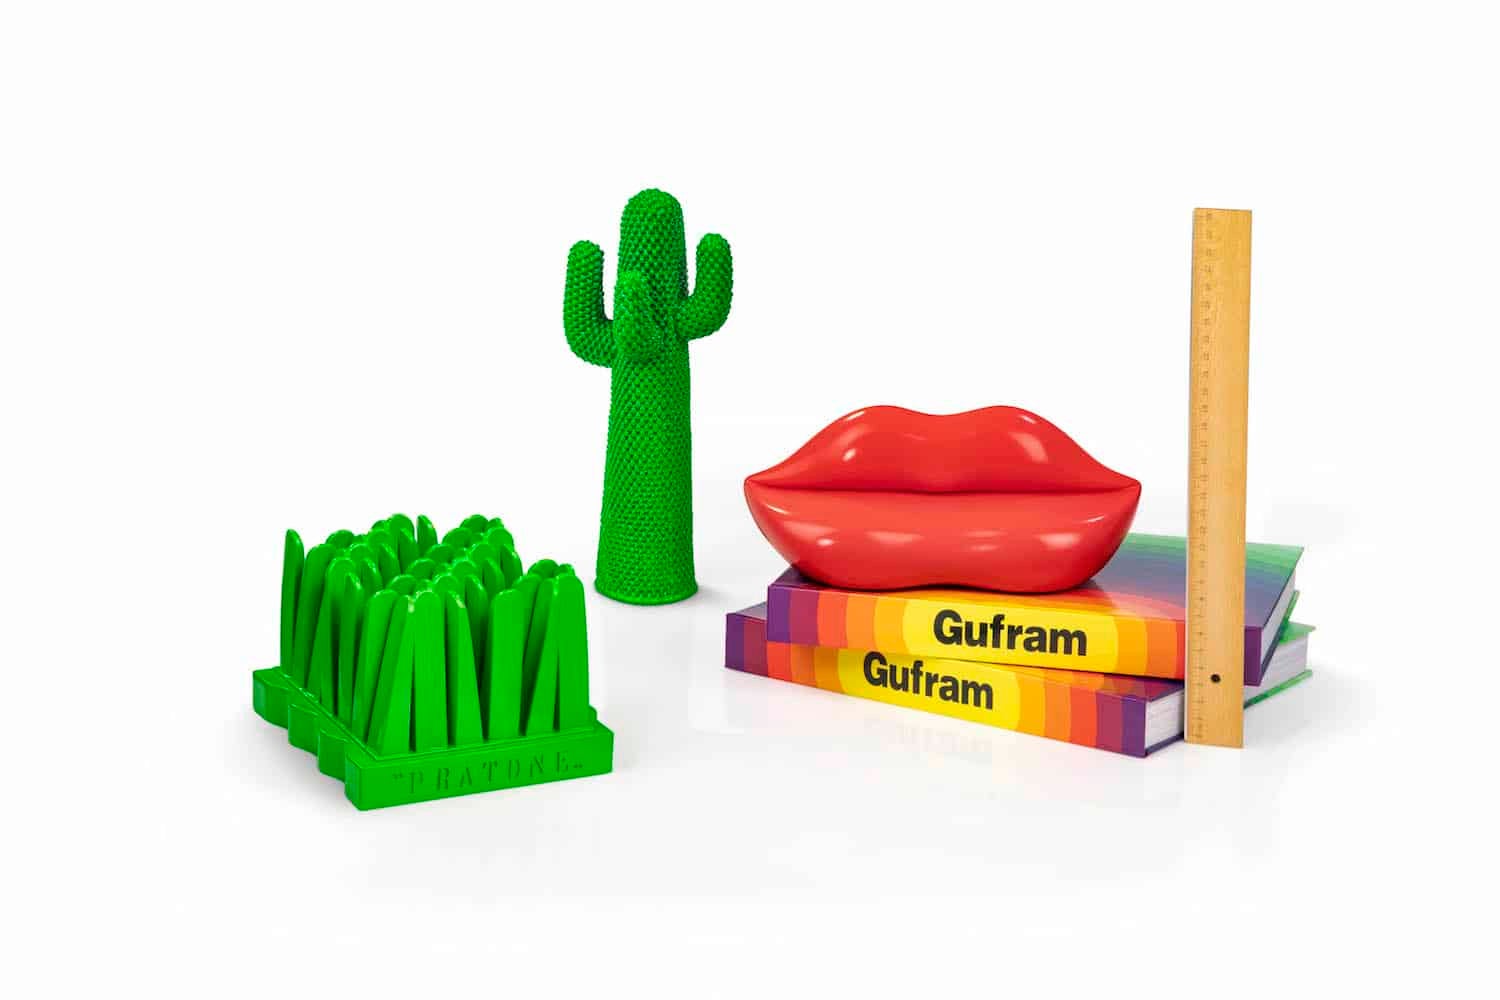 featured image for post: Half a Century After Gufram’s Icons Debuted, Miniature Versions Are Here